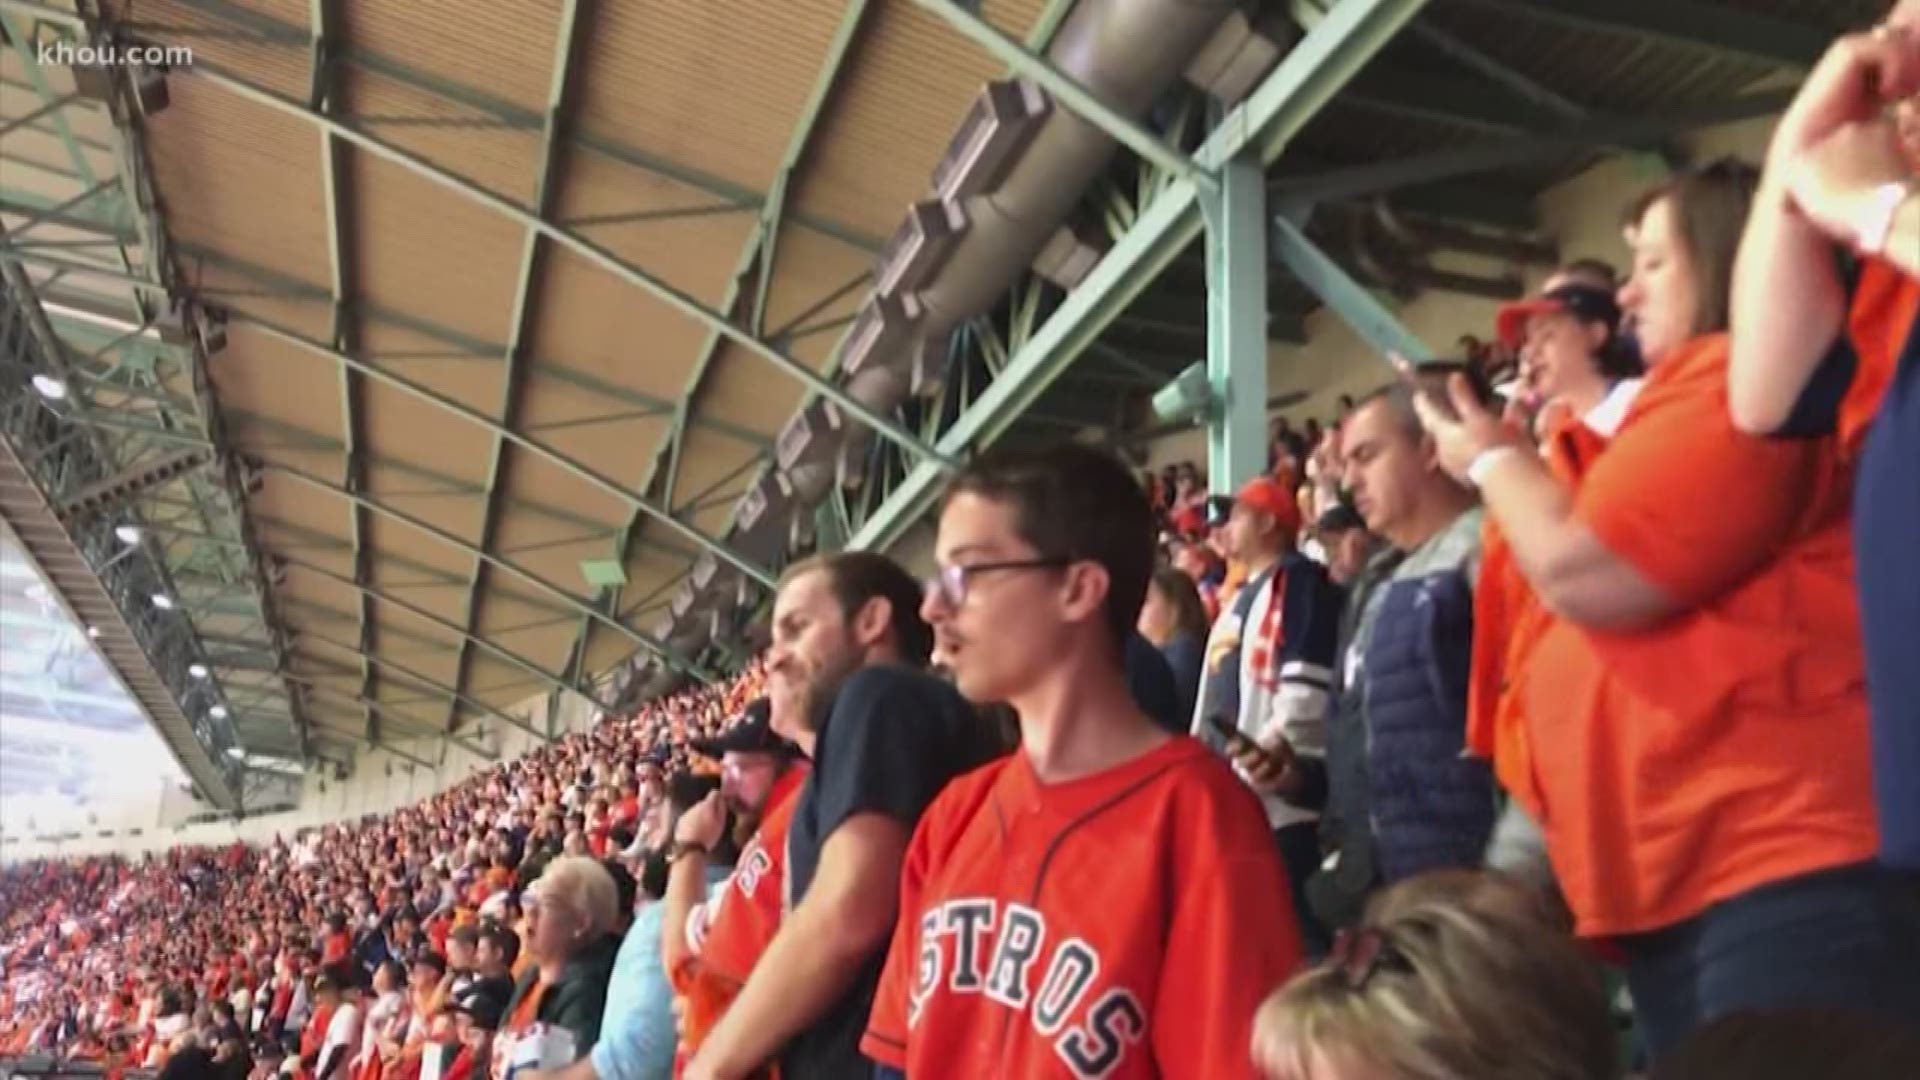 Houston's baseball fans were named some of the best in the country.